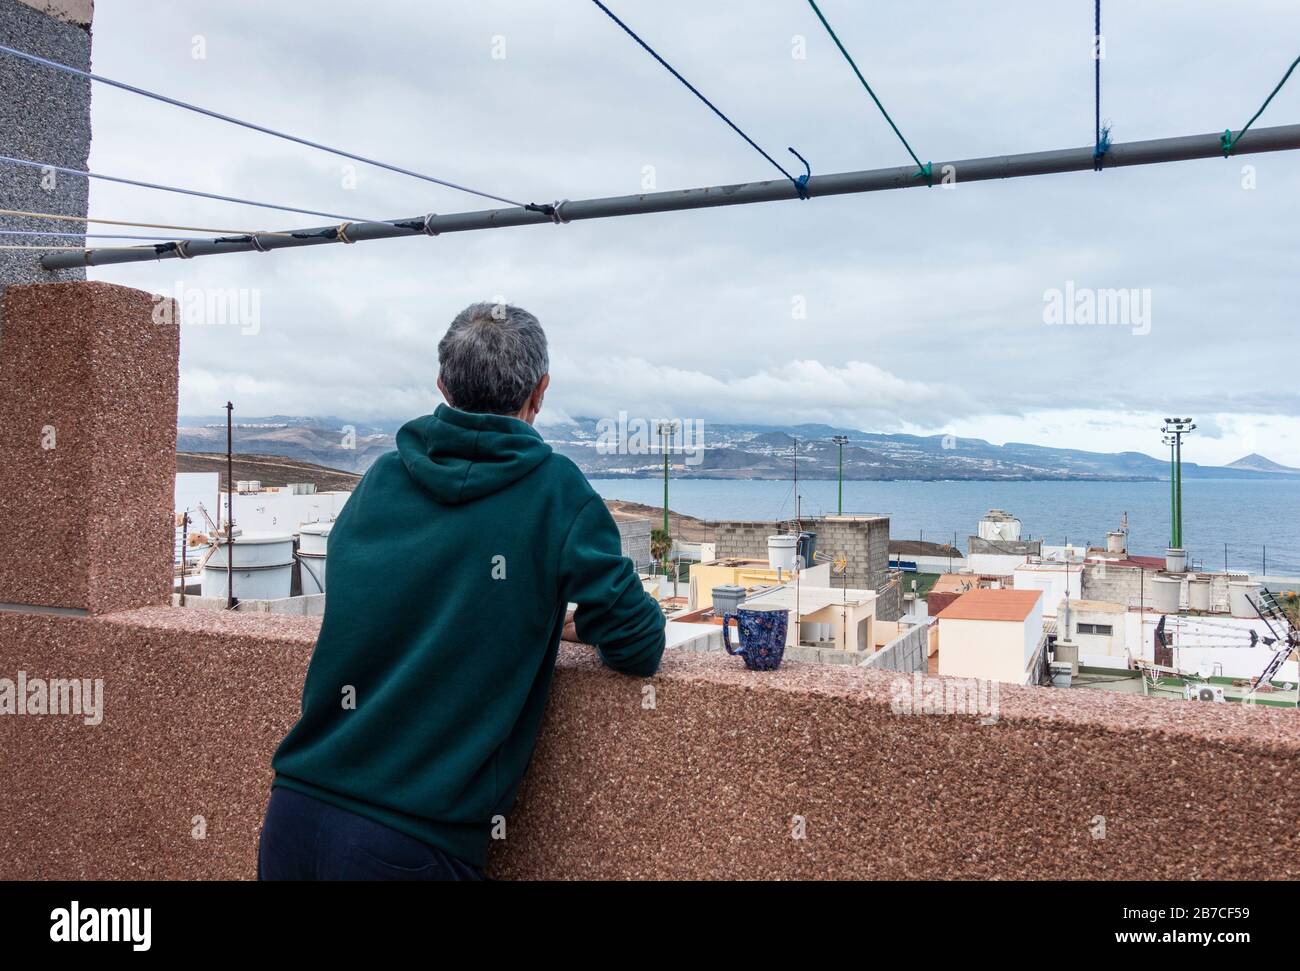 Las Palmas, Gran Canaria, Canary Islands, Spain. 15th March 2020. A local resident takes his morning coffee from rooftop balcony in Las Palmas on Gran Canaria as Spain goes into lockdown mode to combat Coronavirus. A state of emergecy has been declared in Spain, with the whole population ordered to stay indoors. People will be allowed to go to work (if unable to work from home), attend essential medical appointments and shop for essential items.  Credit: Alan Dawson/Alamy Live News Stock Photo